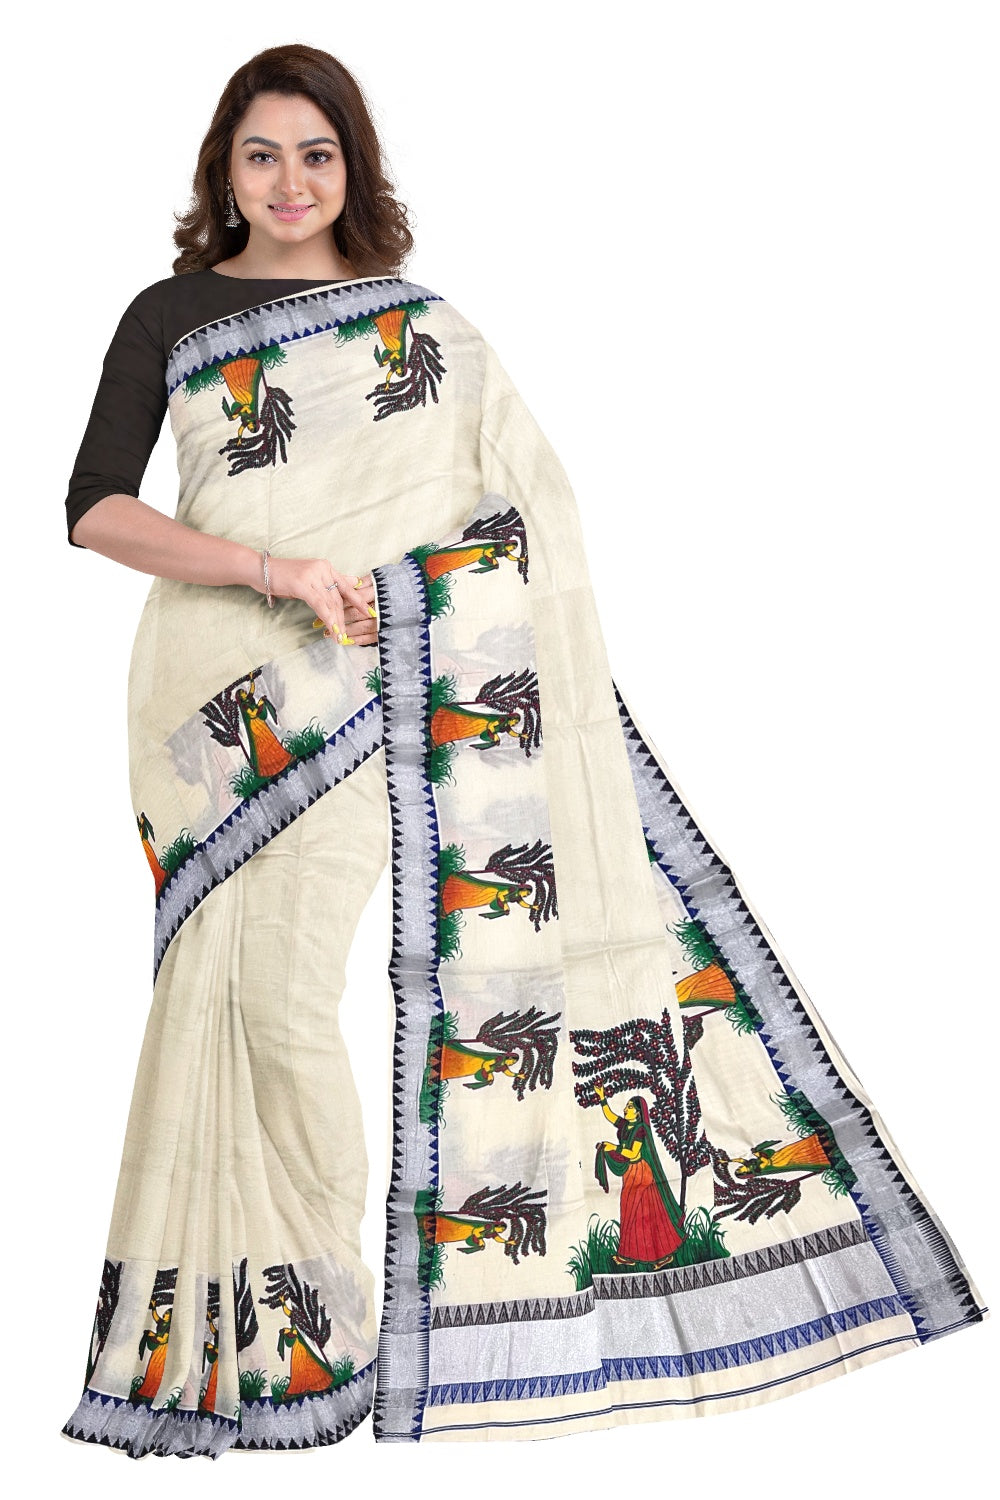 Kerala Pure Cotton Saree with Mural Printed Gardenerette Design and Blue Brown Temple Border